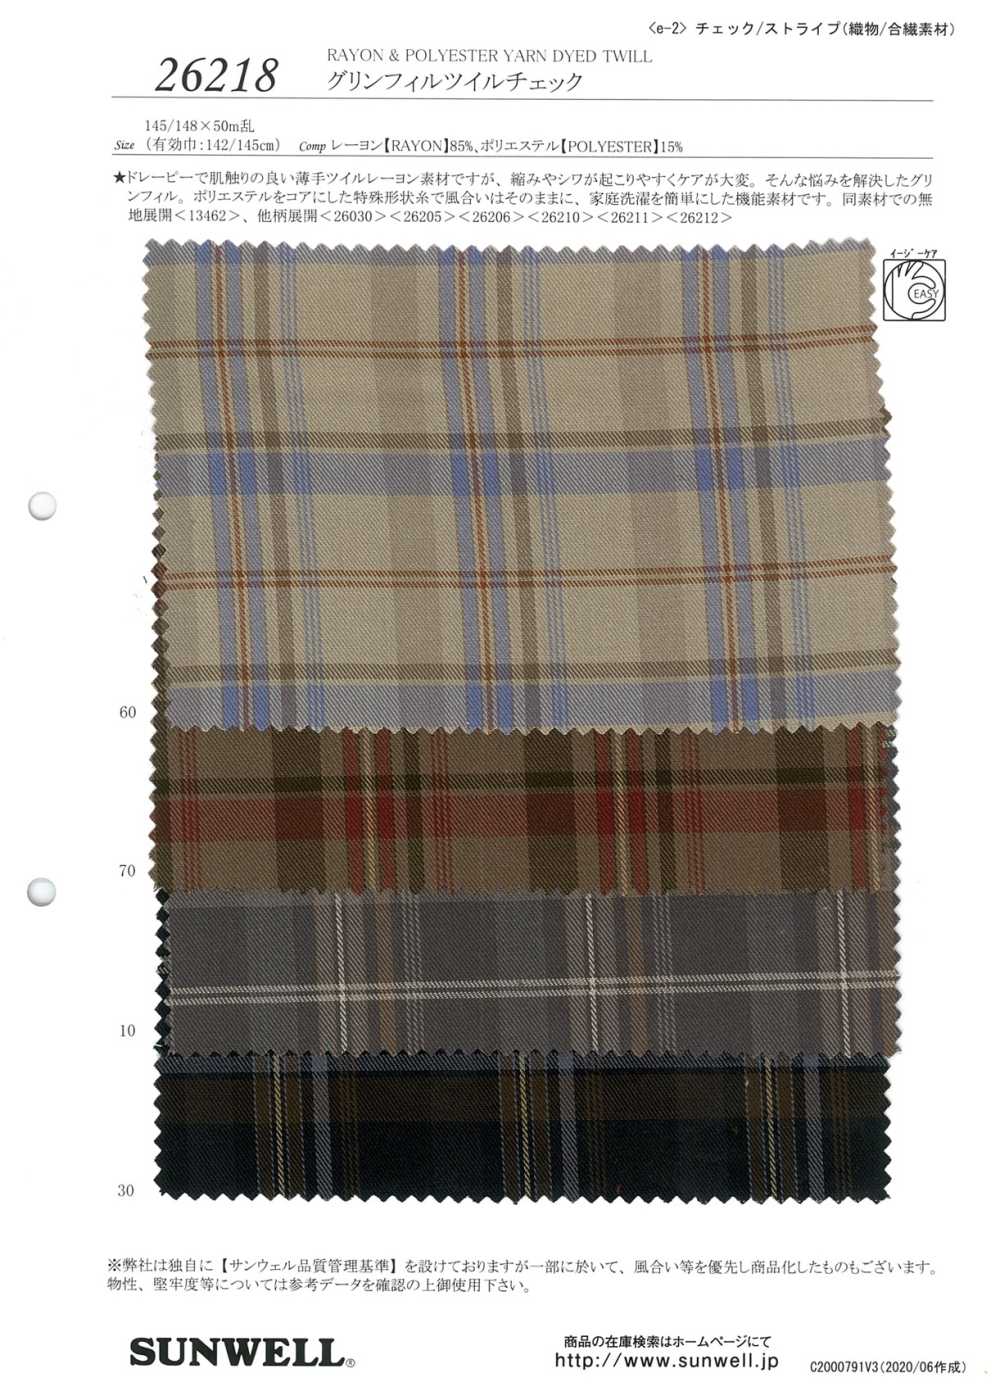 26218 [OUTLET] GrinFil Twill Check[Fabrication De Textile] SUNWELL